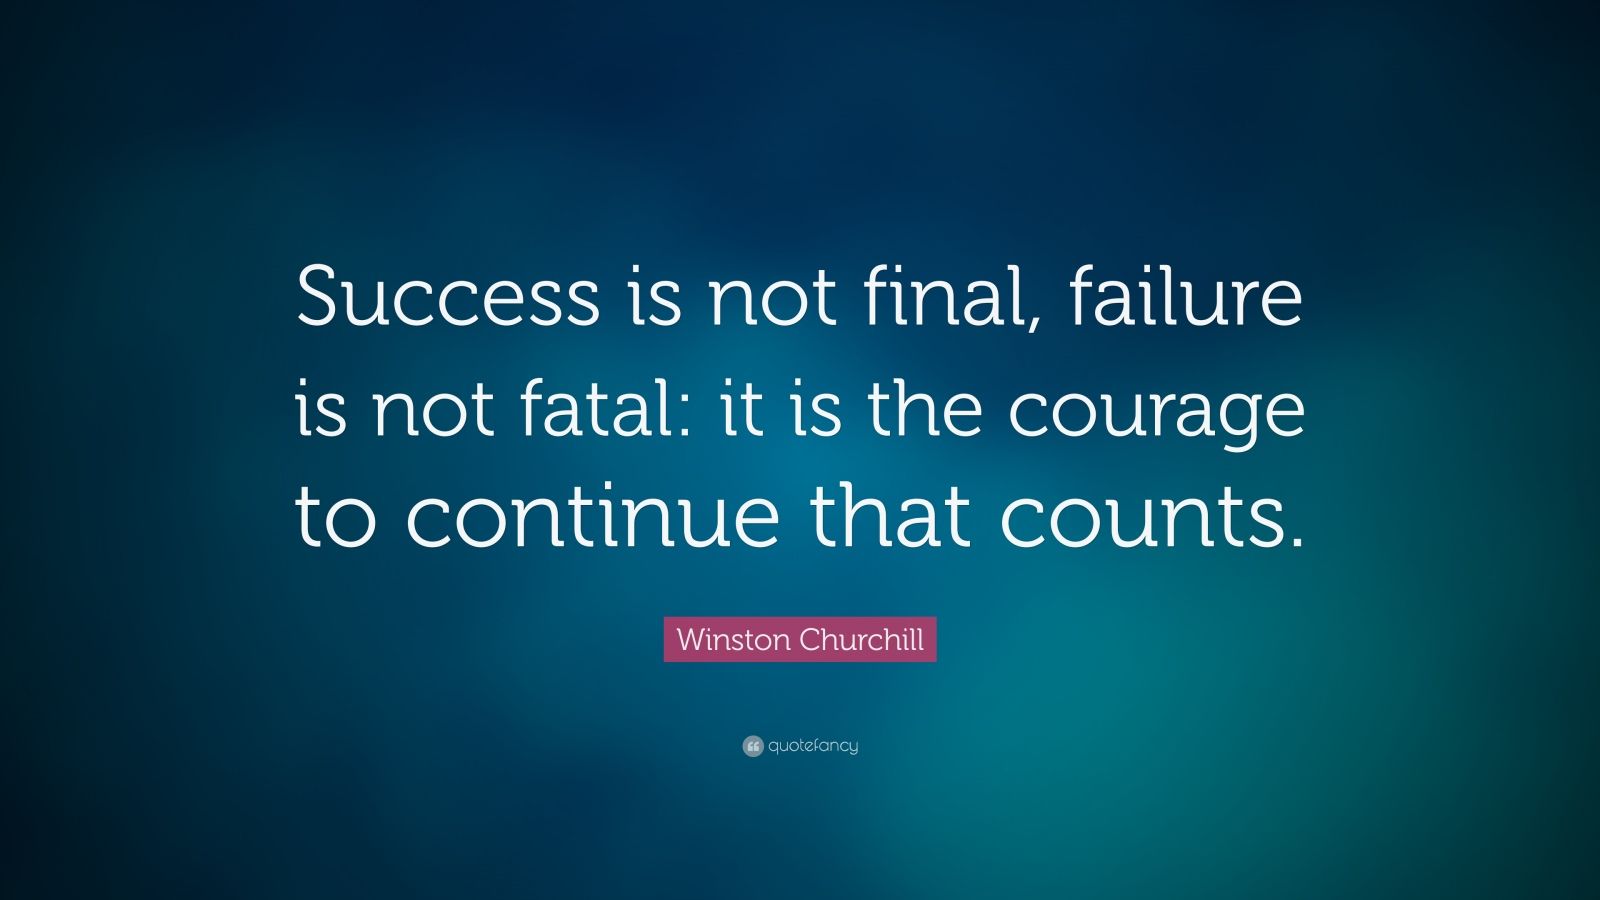 Winston Churchill Quote: “Success is not final, failure is not fatal